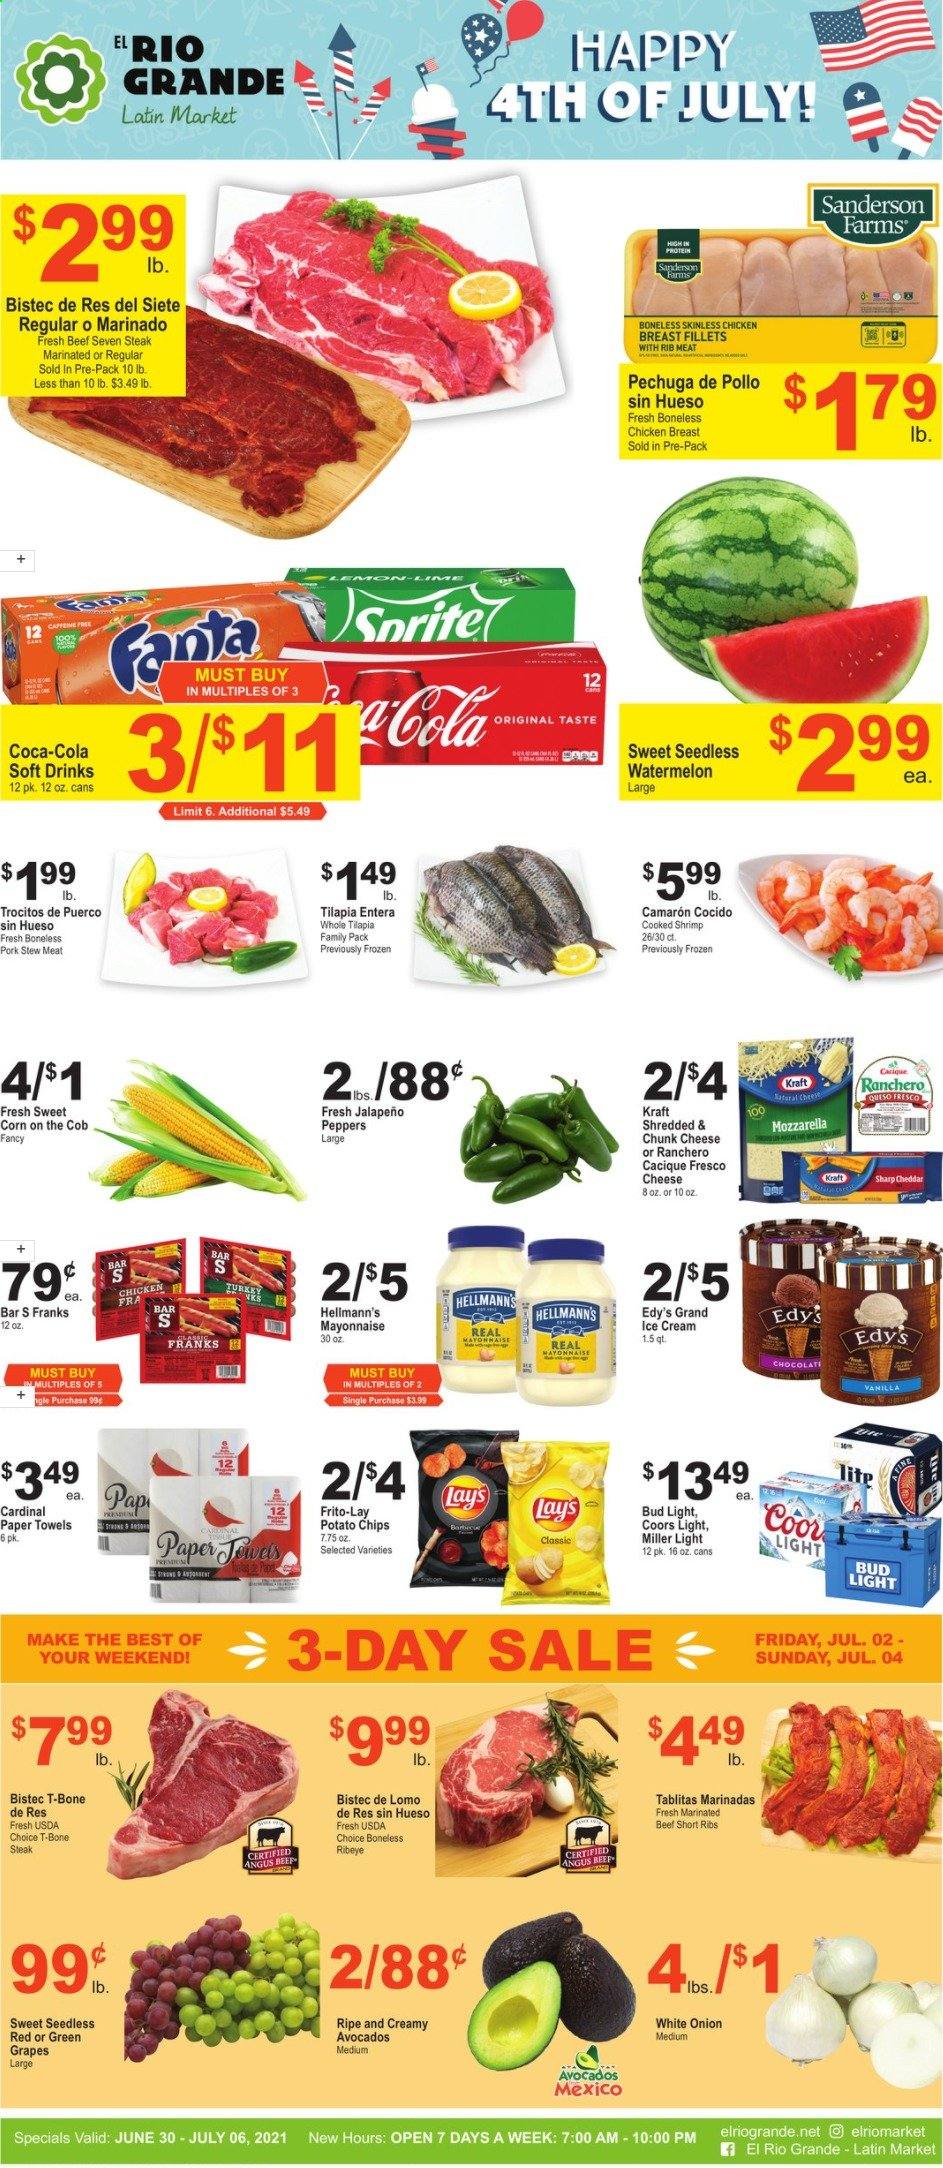 thumbnail - El Rio Grande Flyer - 06/30/2021 - 07/06/2021 - Sales products - Coors, stew meat, corn, onion, jalapeño, sweet corn, avocado, grapes, watermelon, tilapia, shrimps, Kraft®, mozzarella, chunk cheese, mayonnaise, Hellmann’s, ice cream, potato chips, Lay’s, Frito-Lay, Coca-Cola, Fanta, soft drink, beer, Bud Light, Miller, chicken breasts, beef meat, beef ribs, t-bone steak, steak, marinated beef. Page 1.